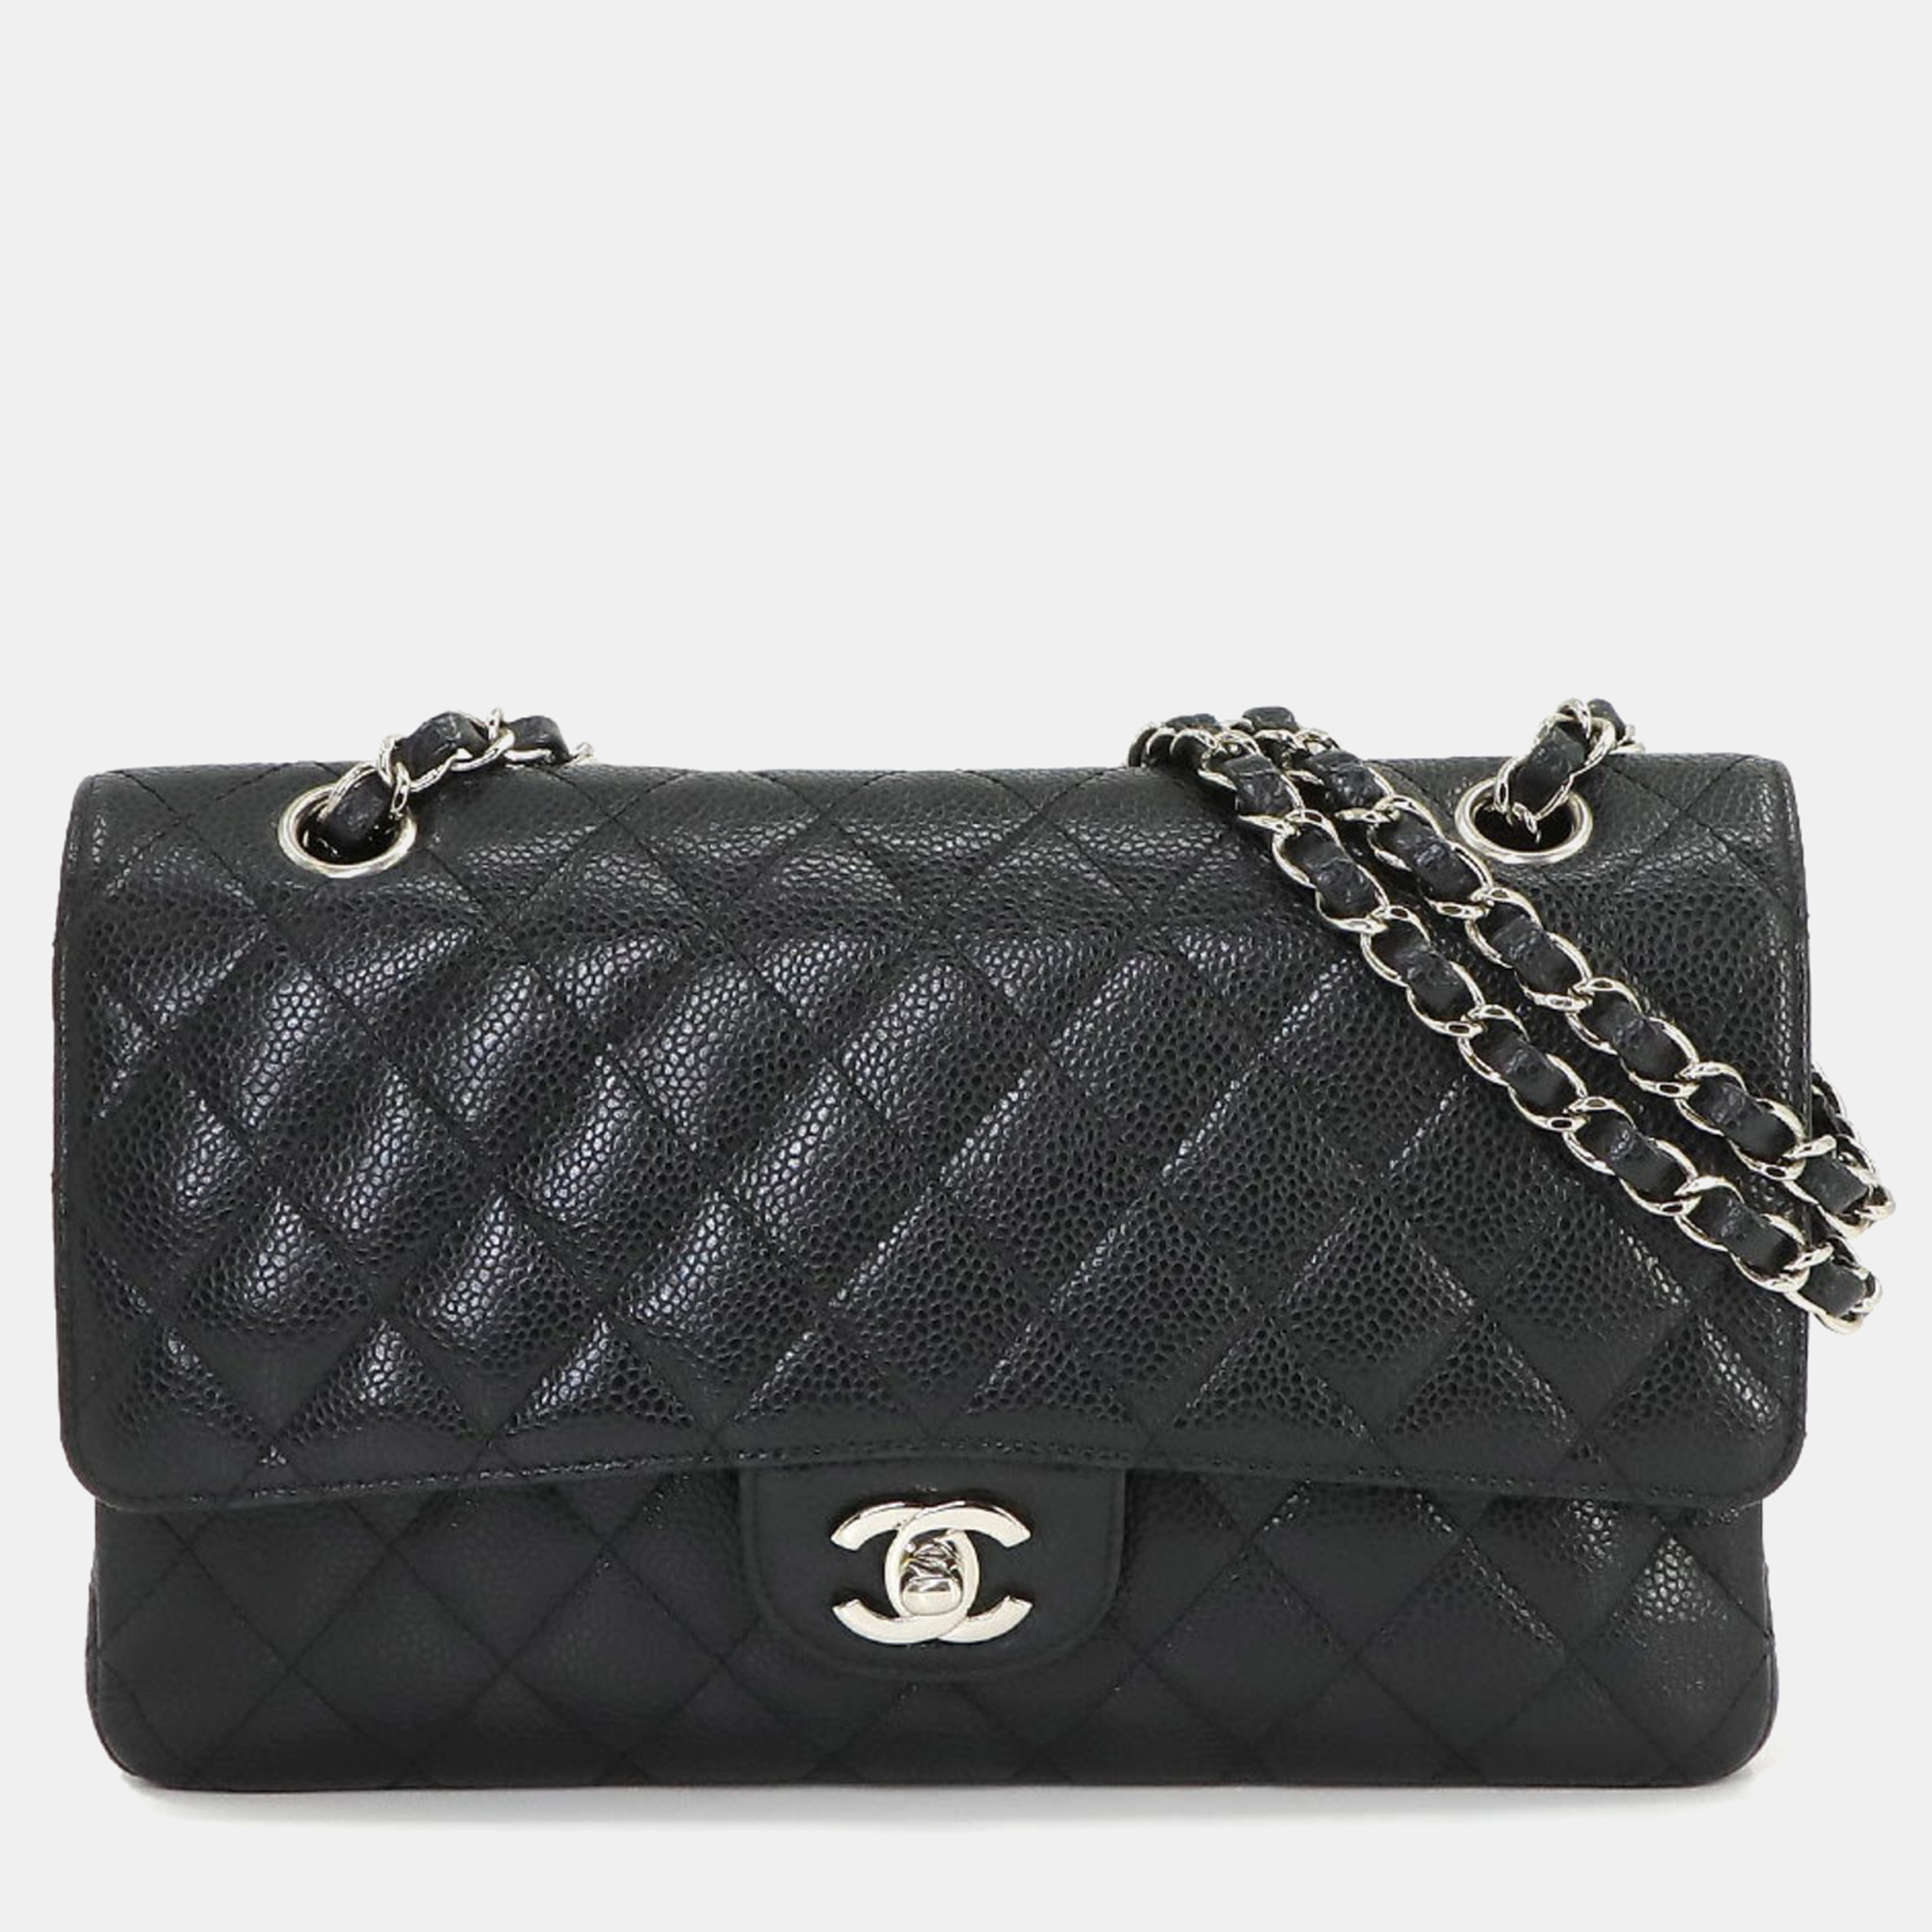 Crafted with precision this Chanel shoulder bag combines luxurious materials with impeccable design ensuring you make a sophisticated statement wherever you go. Invest in it today.